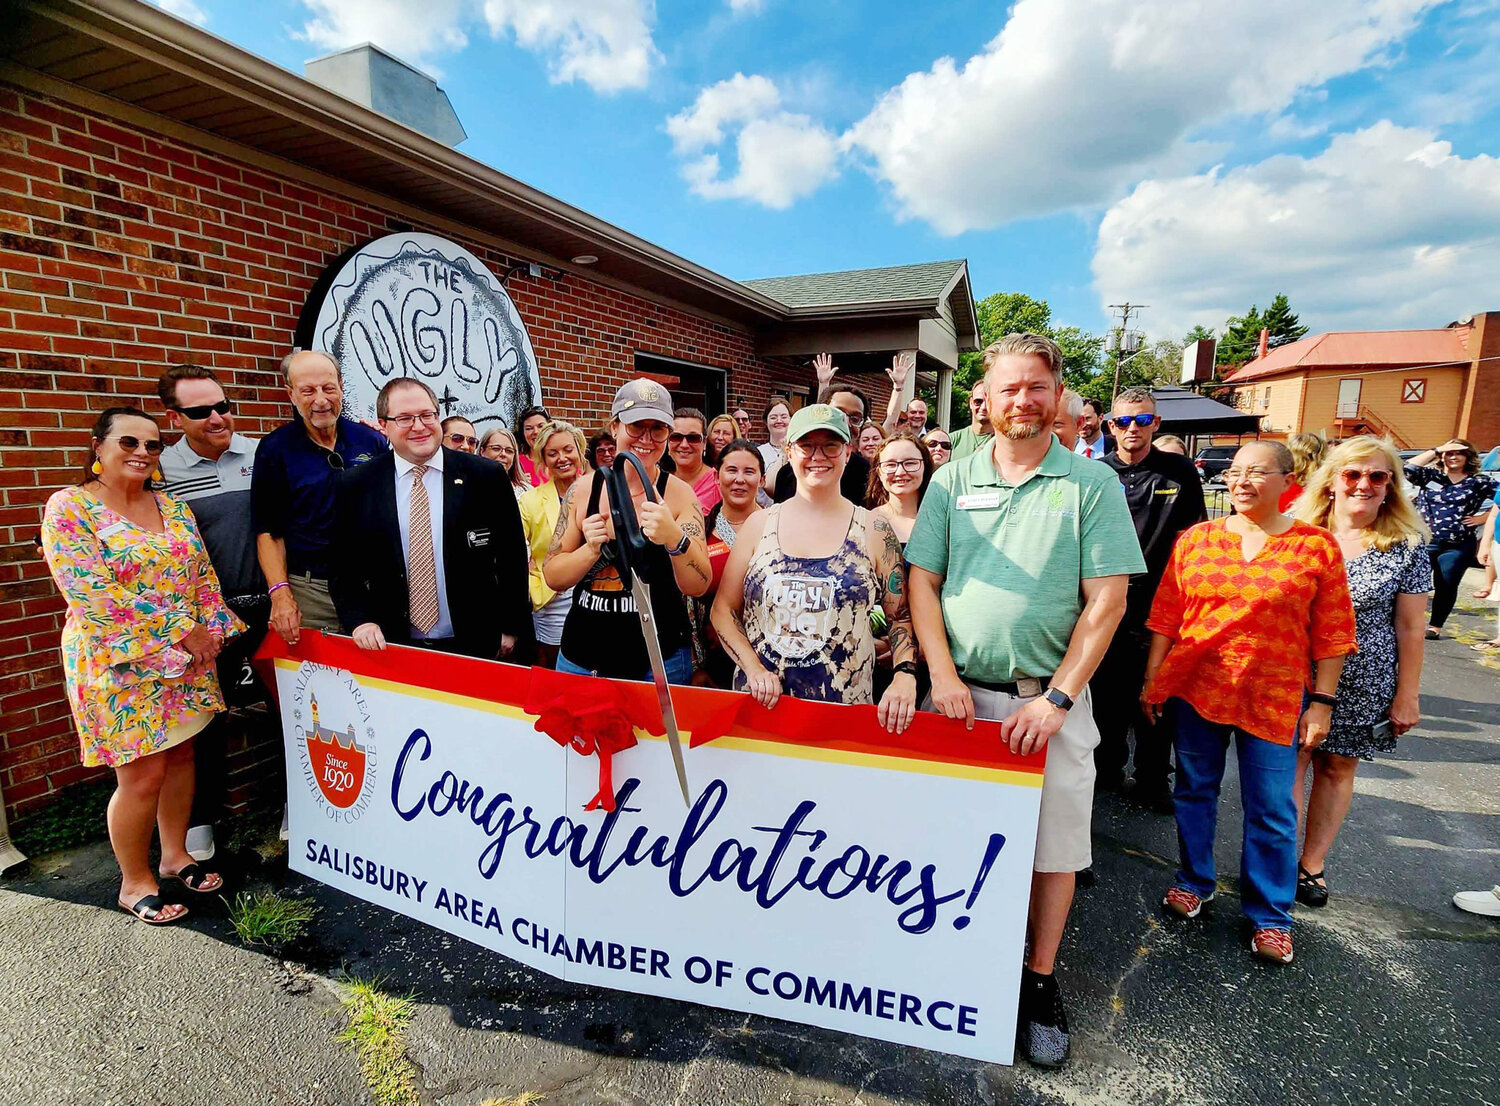 Shaina Bounds and Heather Hall of The Ugly Pie celebrated the move to their new building with a Salisbury Area Chamber of Commerce ribbon-cutting event.